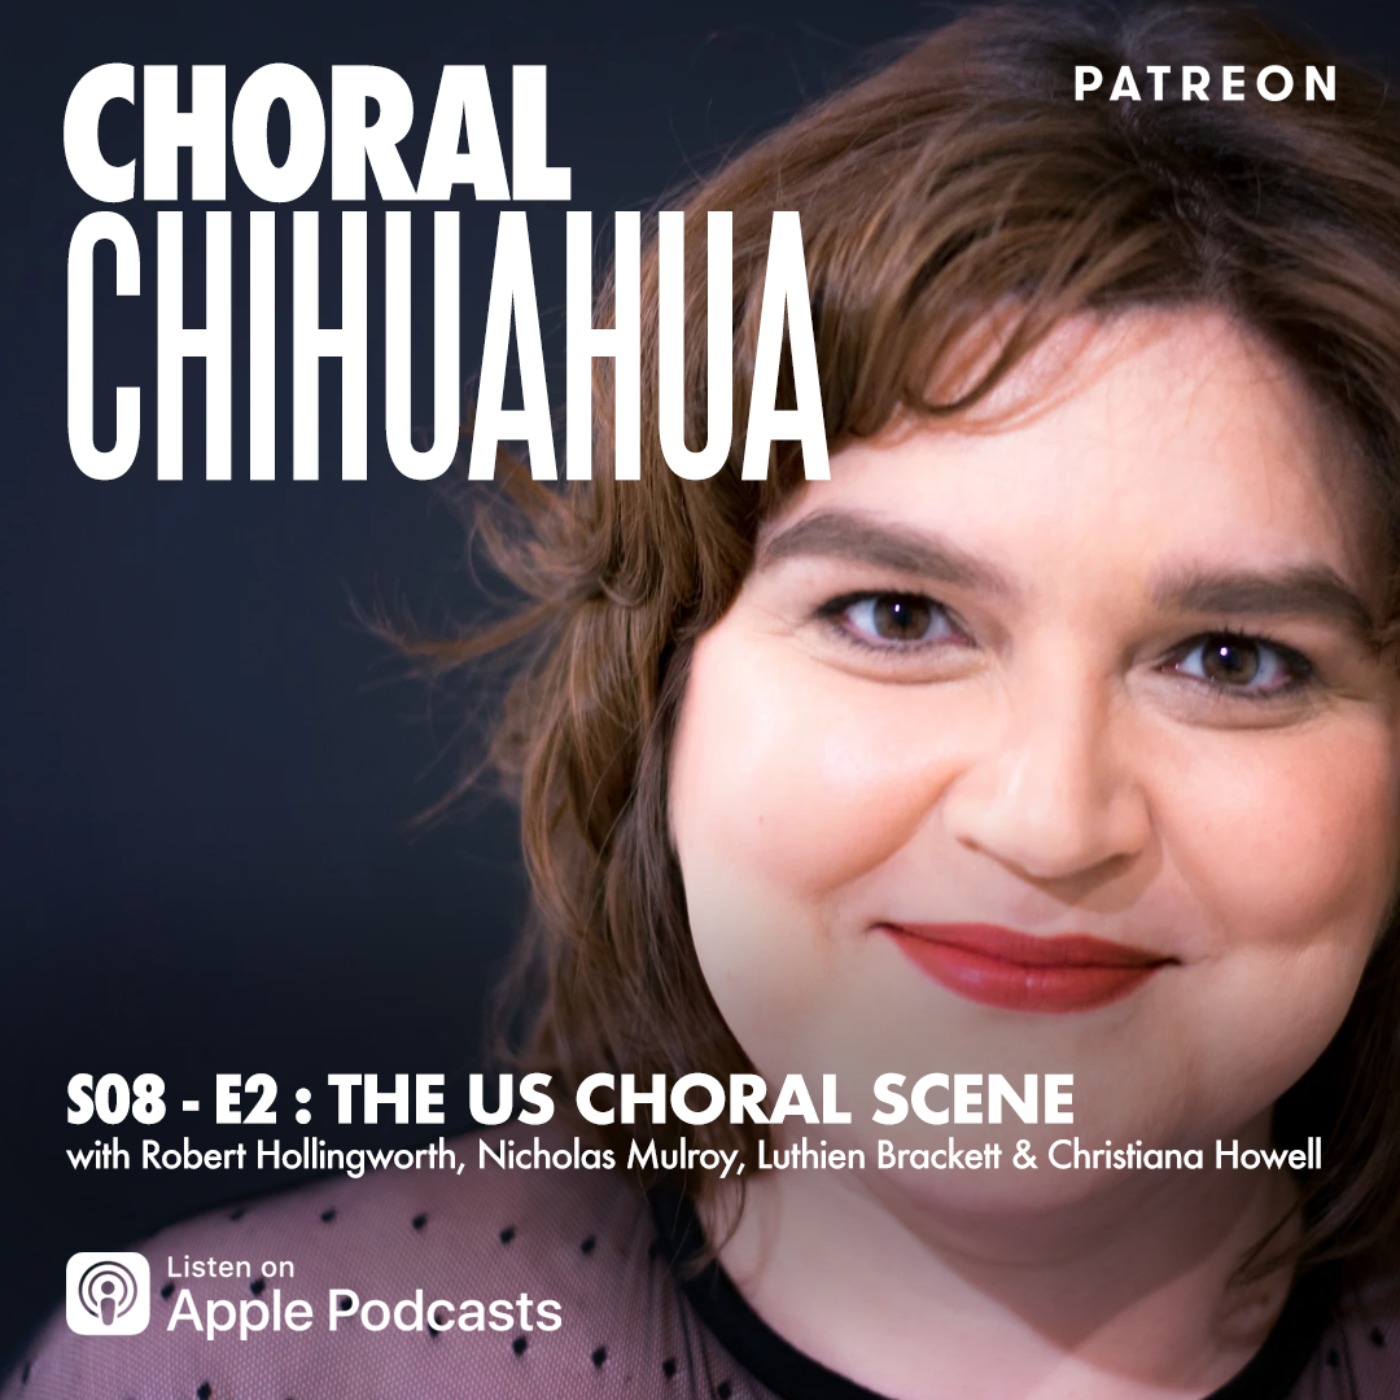 The US Choral Scene